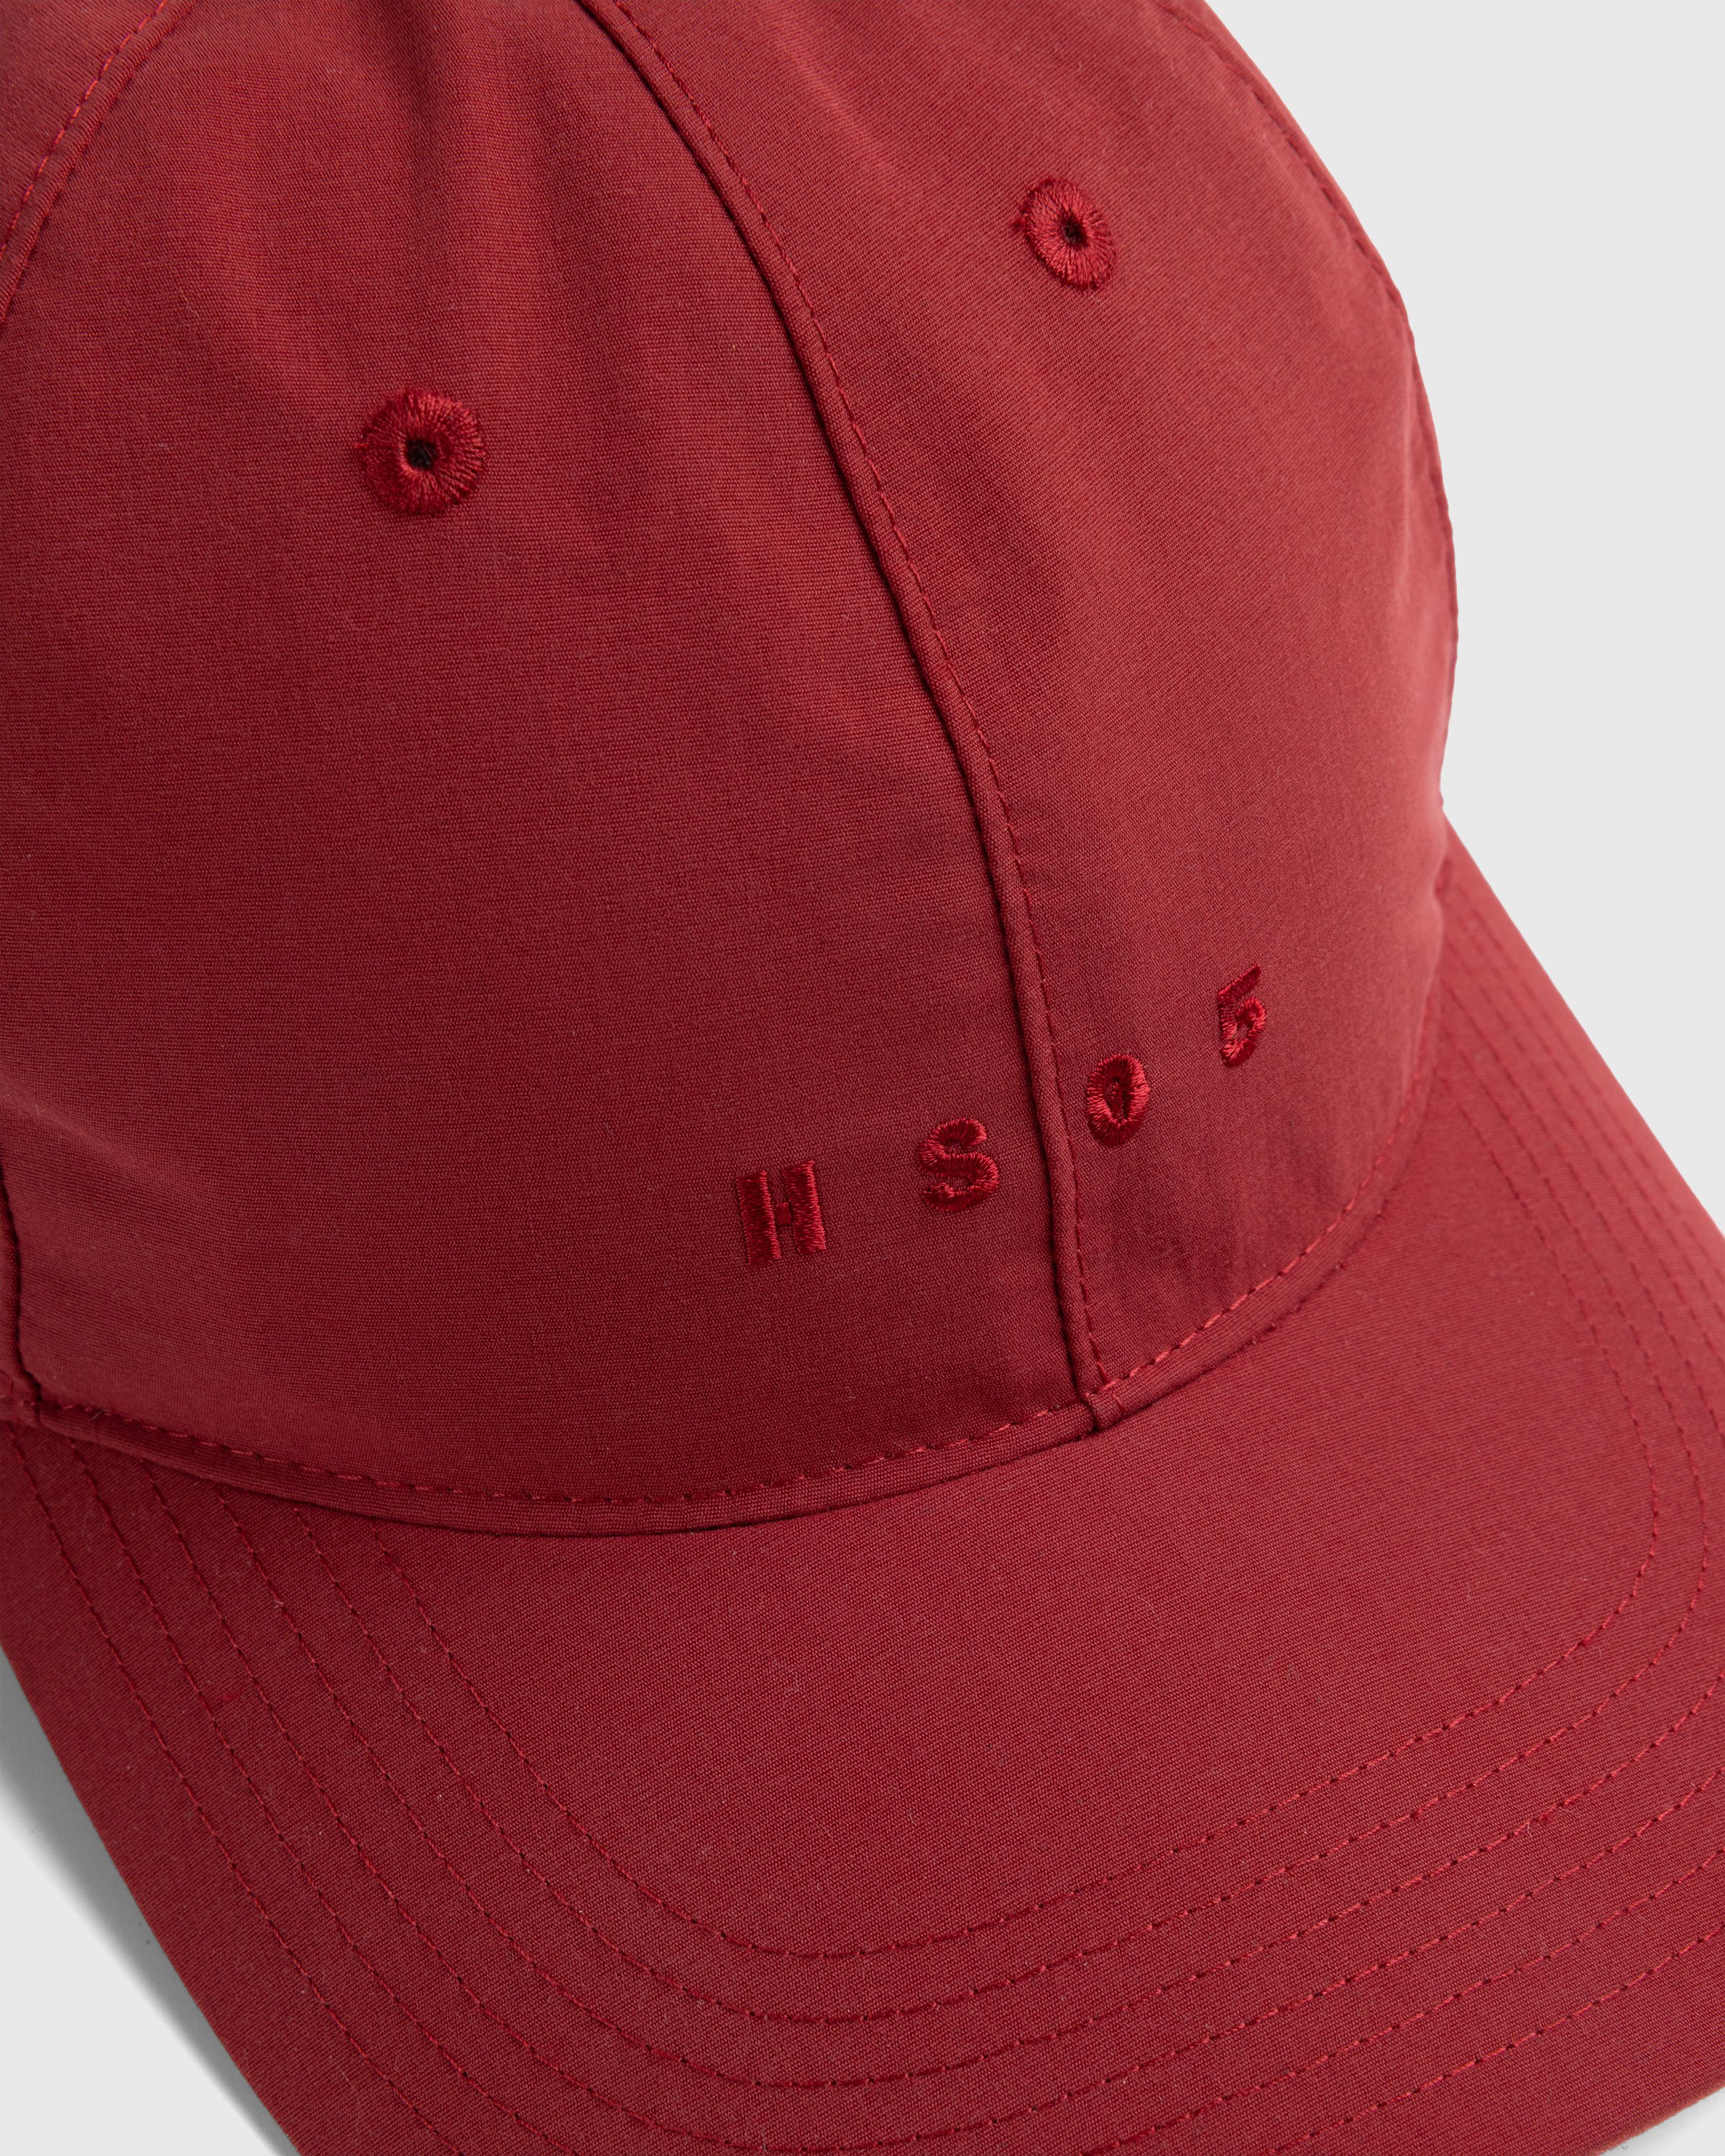 Highsnobiety HS05 - 3 Layer Taped Nylon Cap Red - Accessories - Red - Image 5